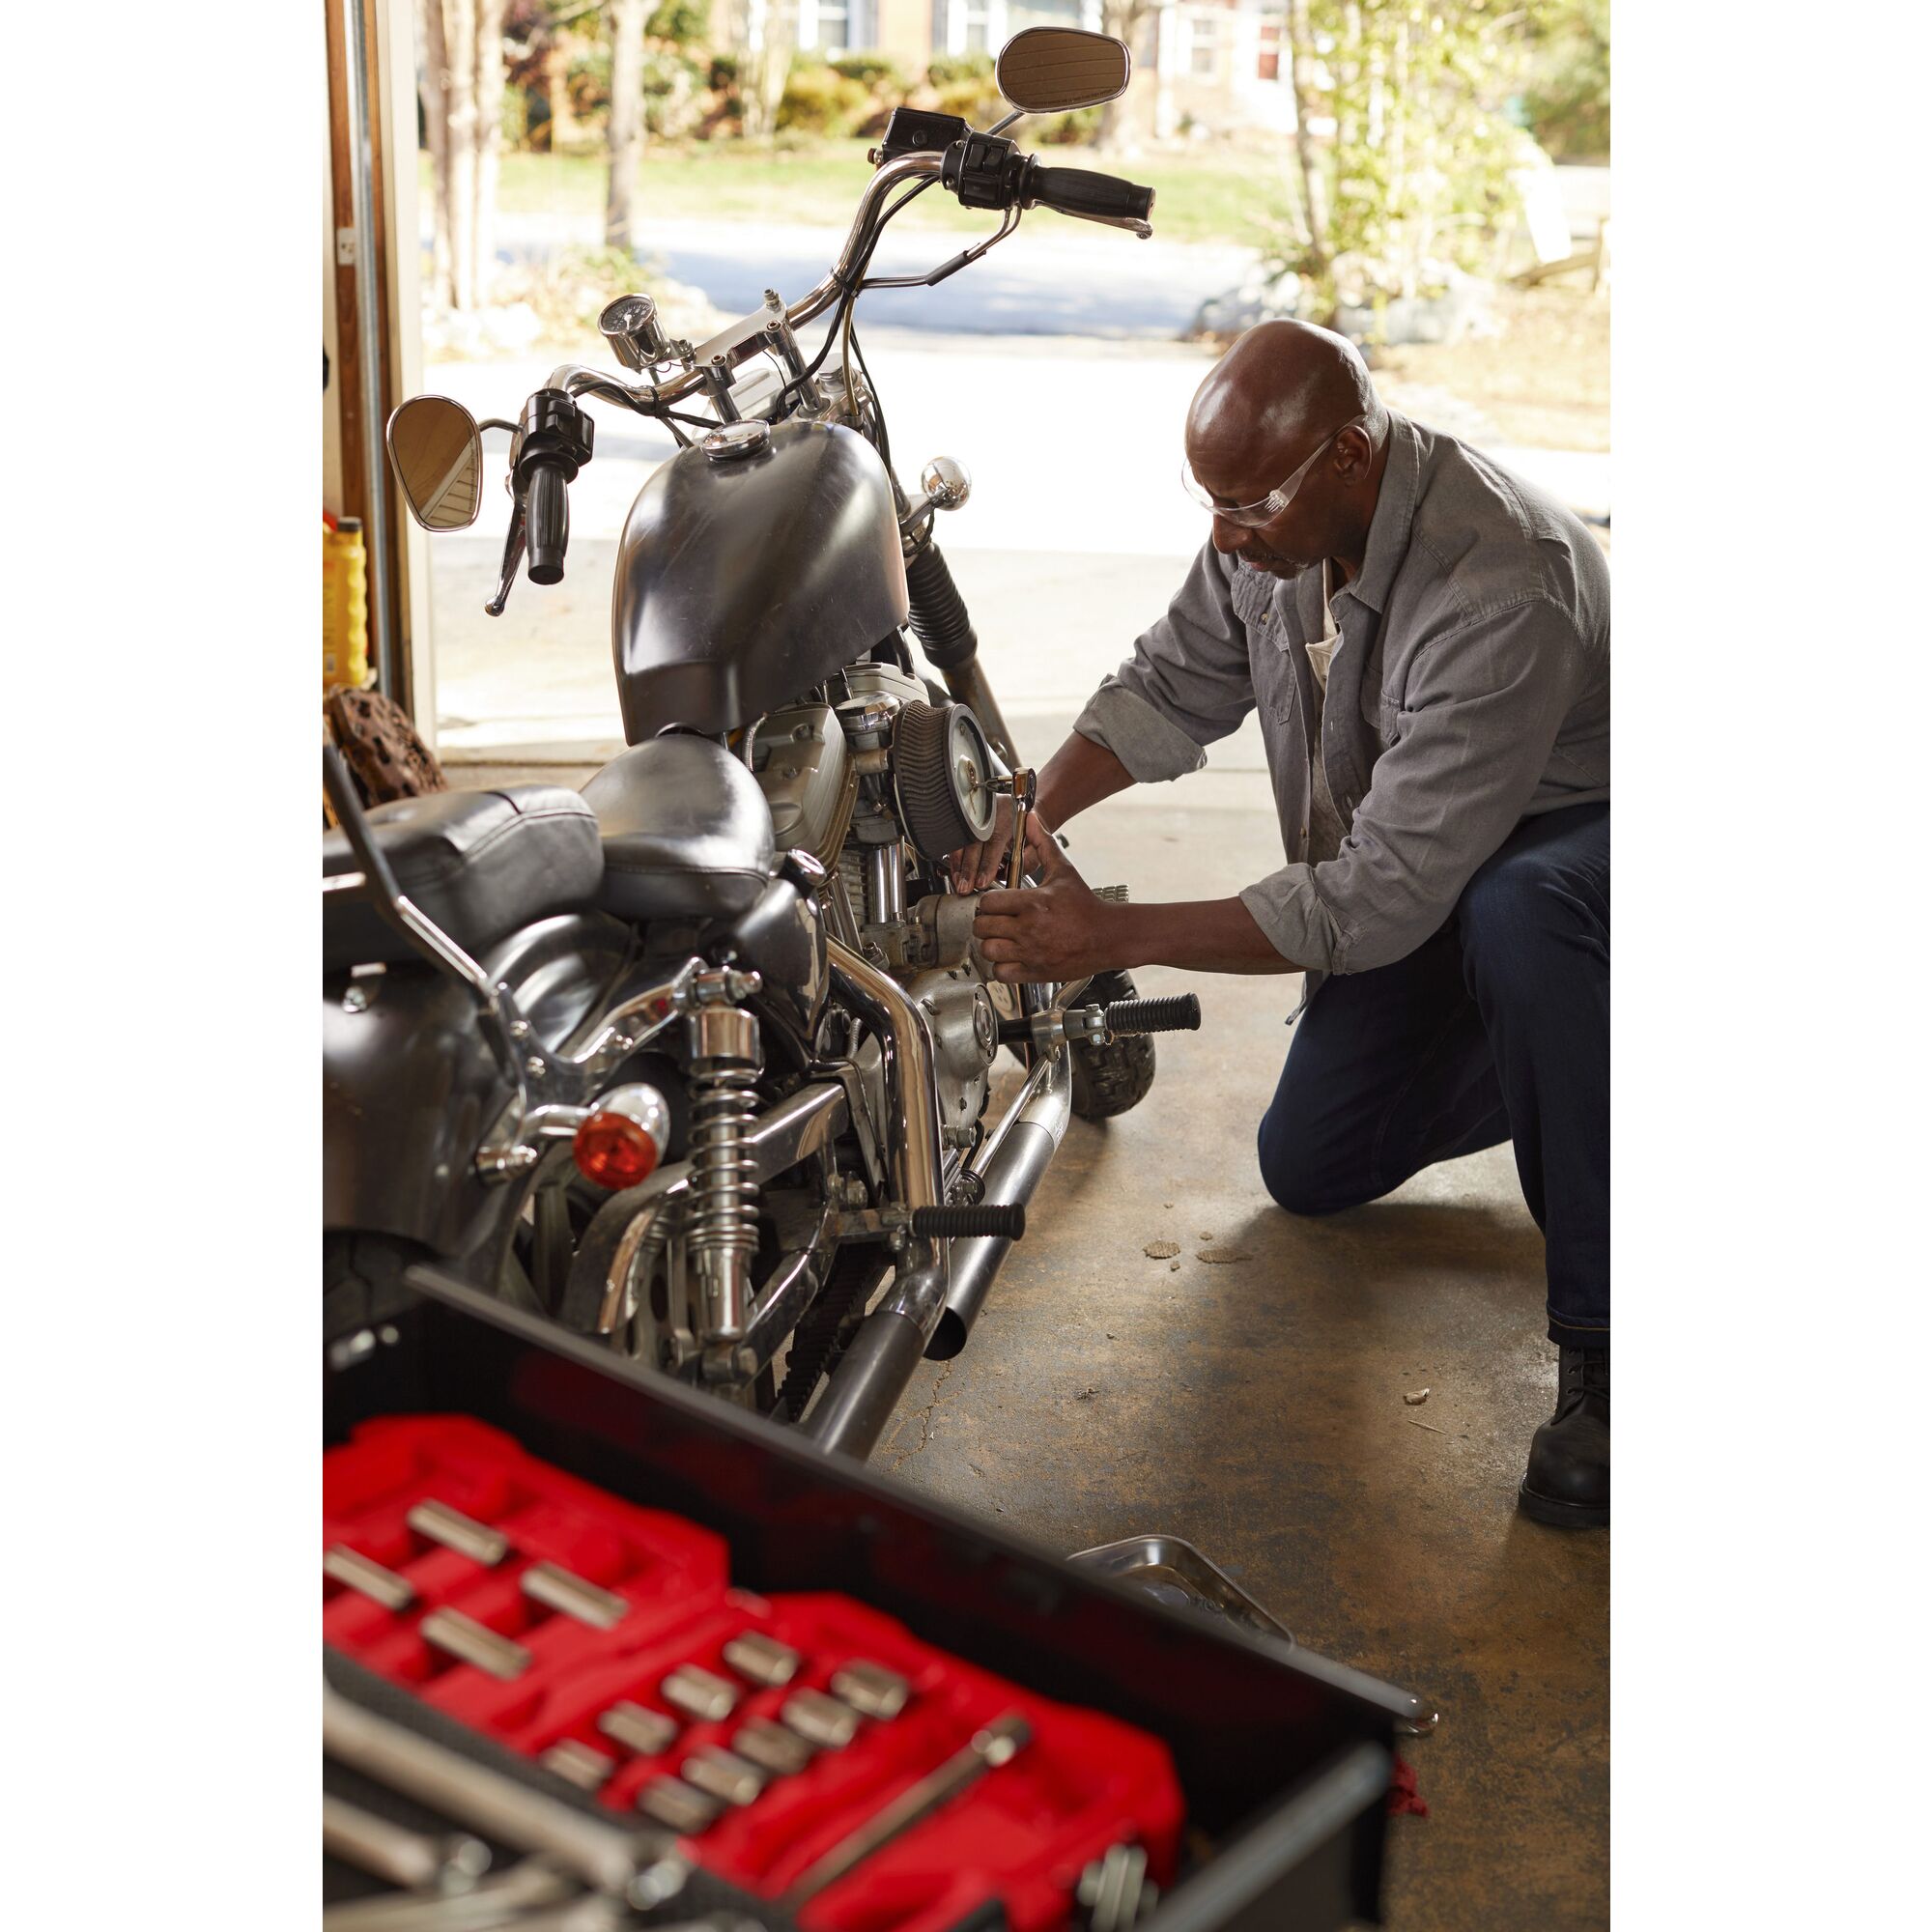 View of CRAFTSMAN Mechanics Tool Set being used by consumer